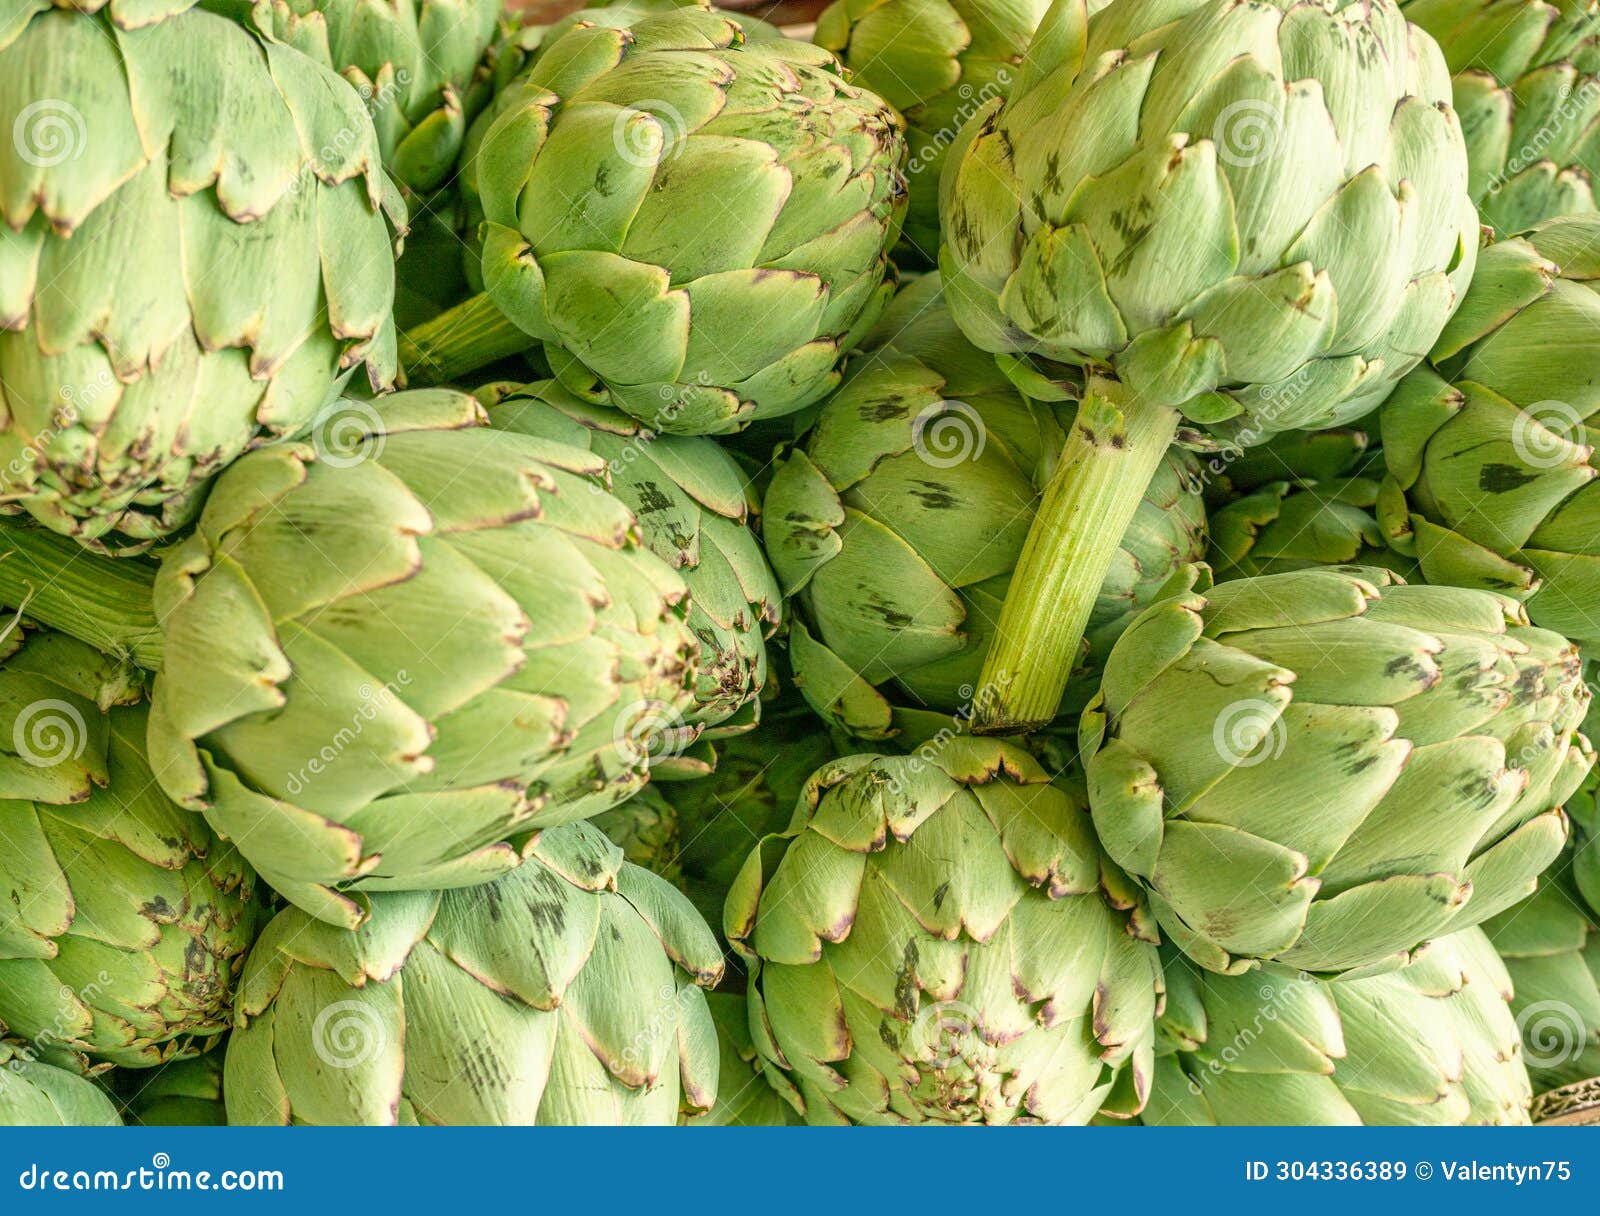 green french artichoke flowers buds on the farm market stall